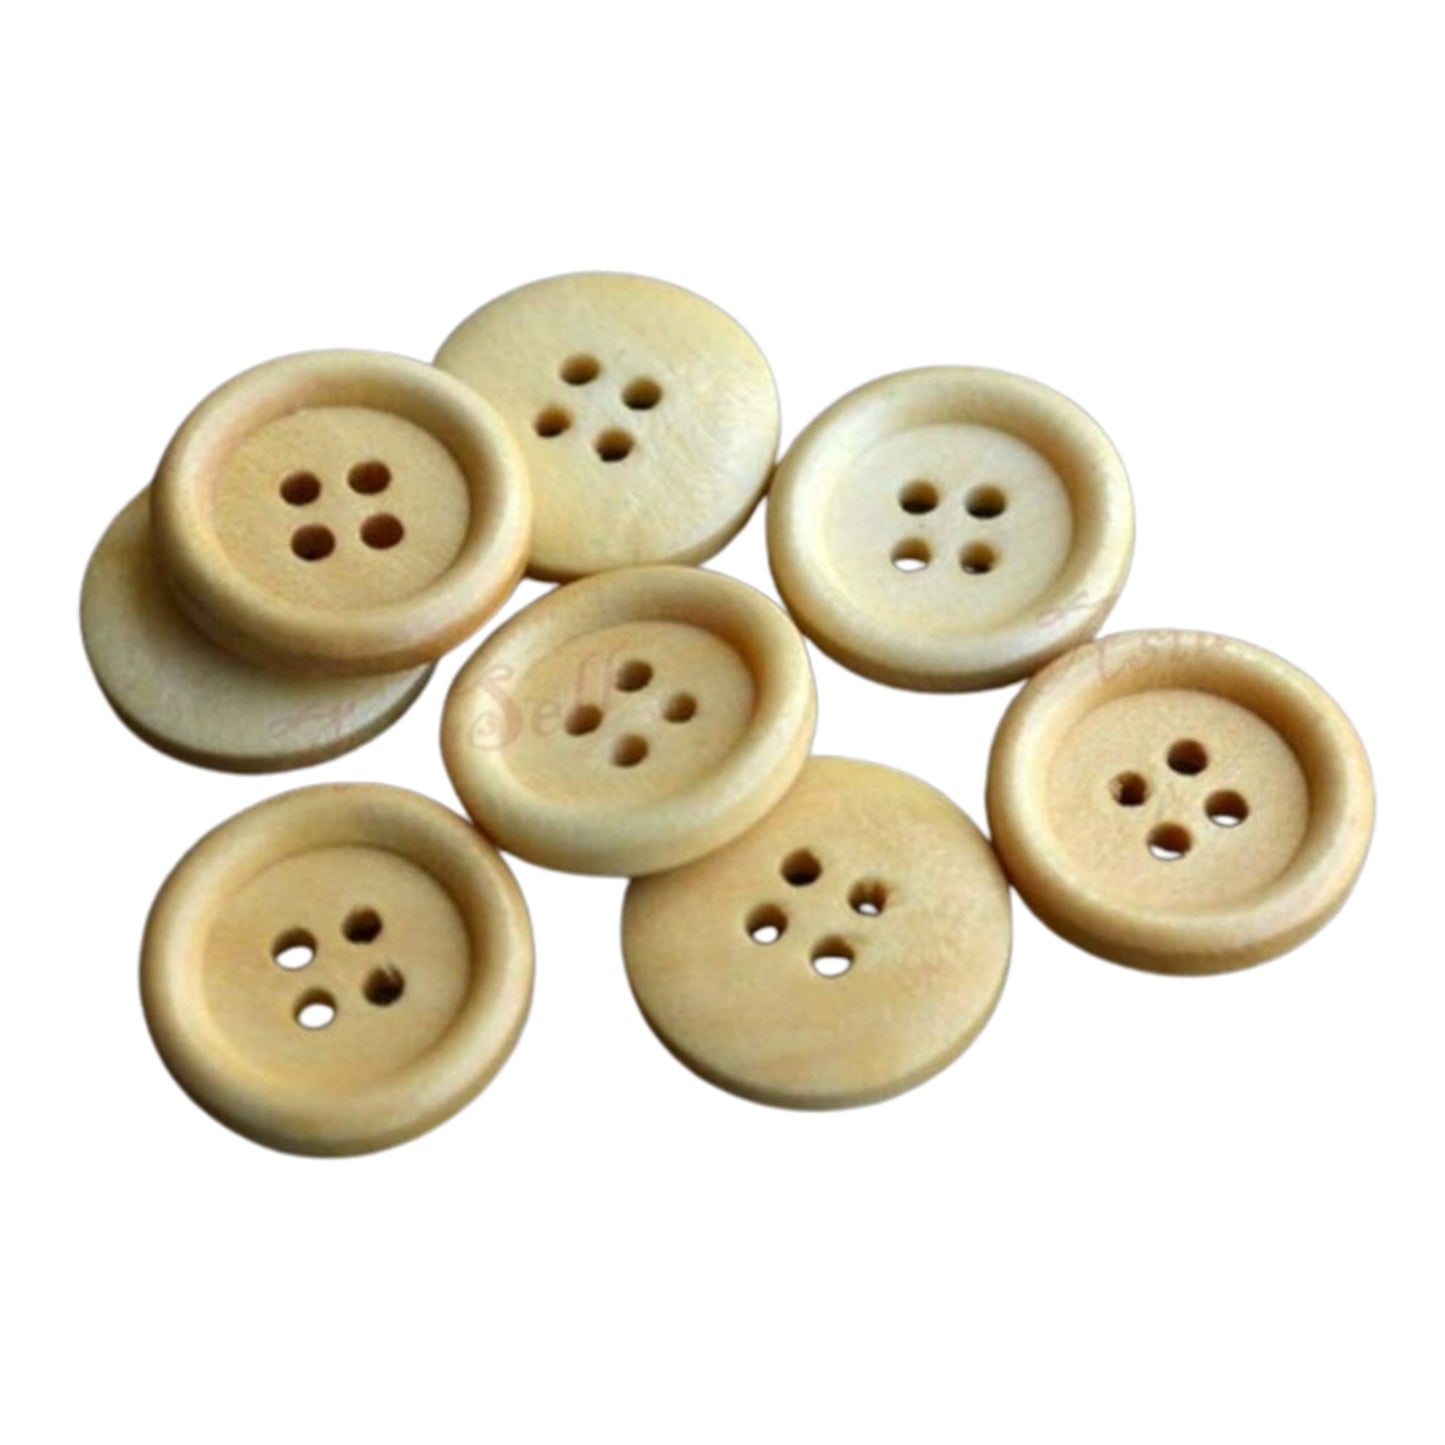 30pcs 4 Holes 25mm Round Wooden Buttons Button Handmade Clothes 4 Hole